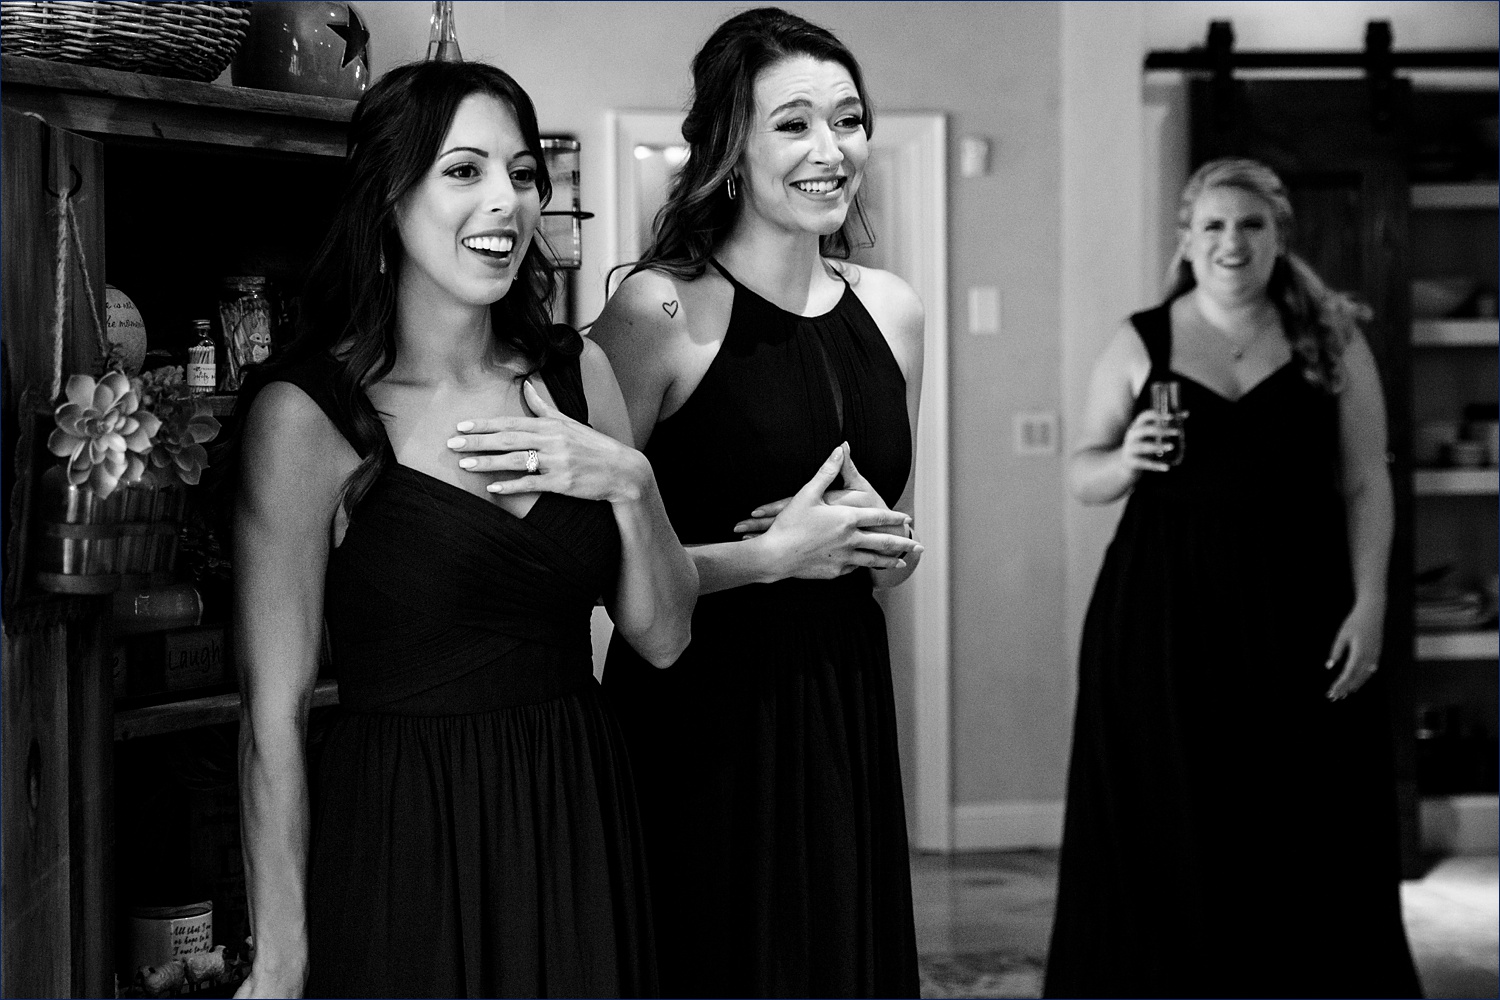 Friends react to seeing the bride in her wedding day gown